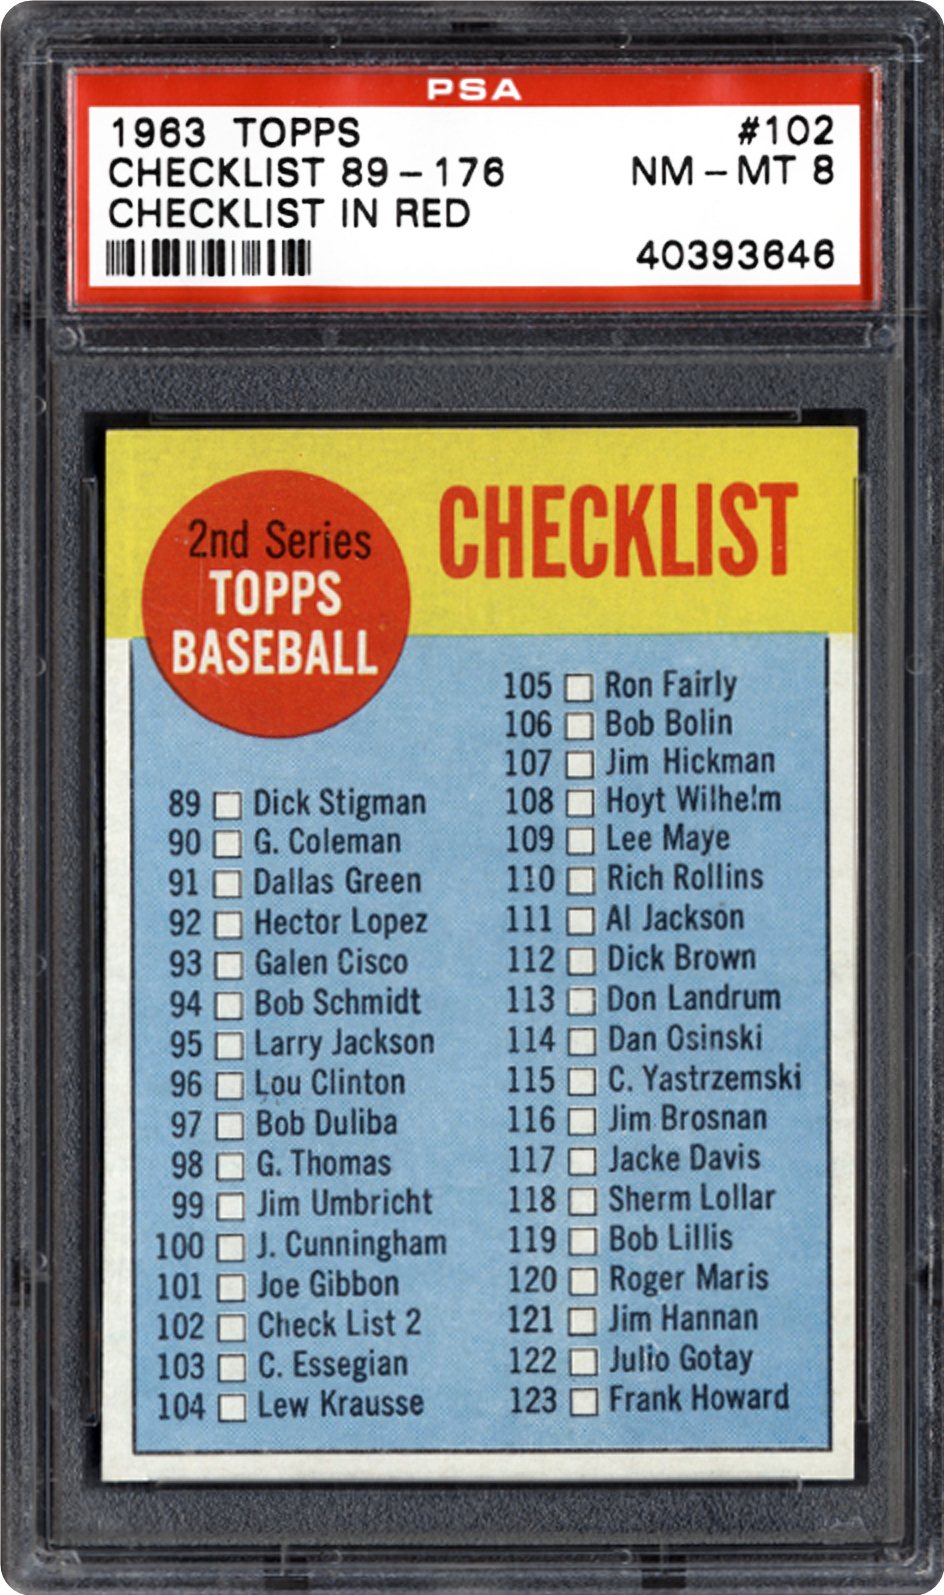 1963 Topps Checklist 89176 (Checklist Red On Yellow) PSA CardFacts™